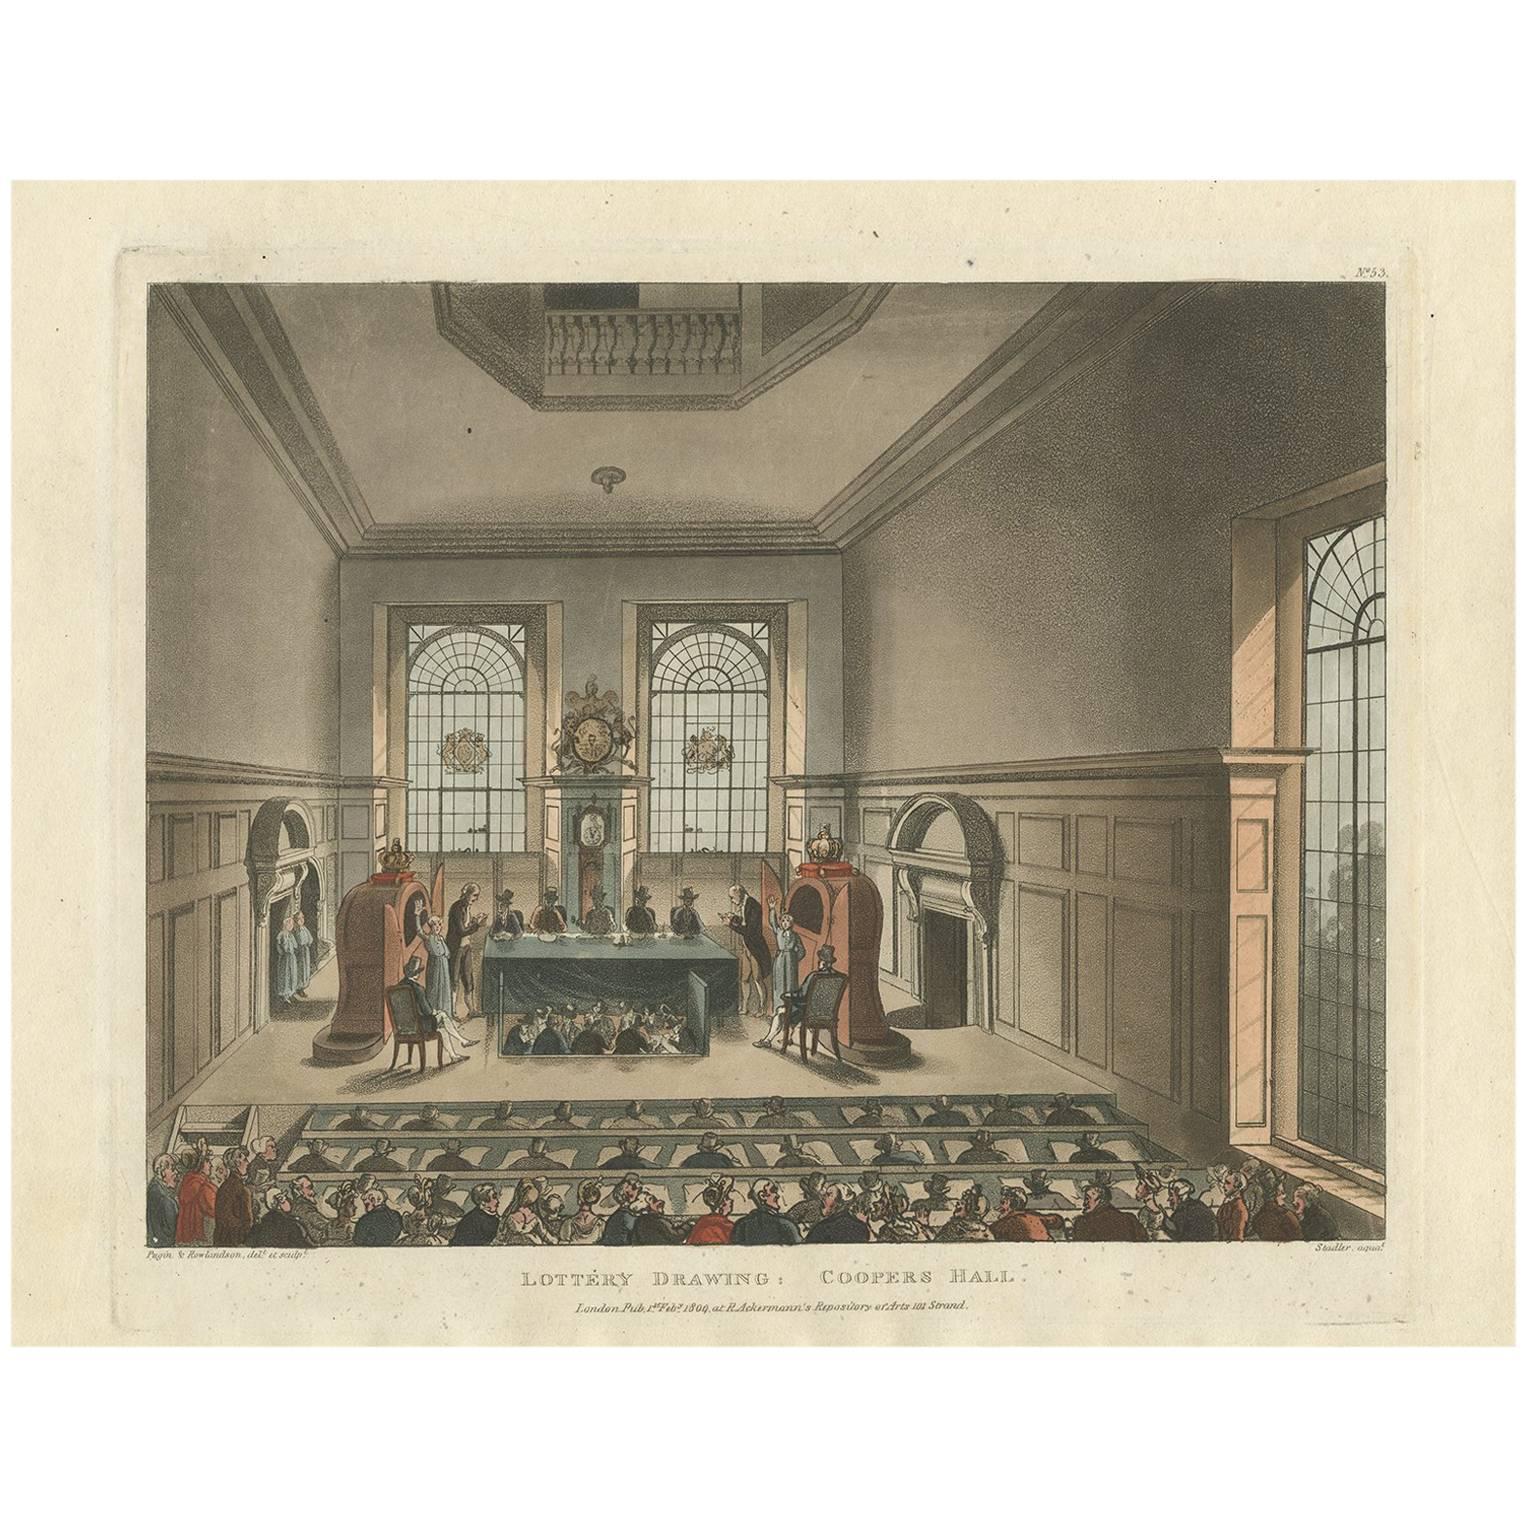 Antique Print of the Lottery Drawing "Coopers Hall" in London, England, 1809